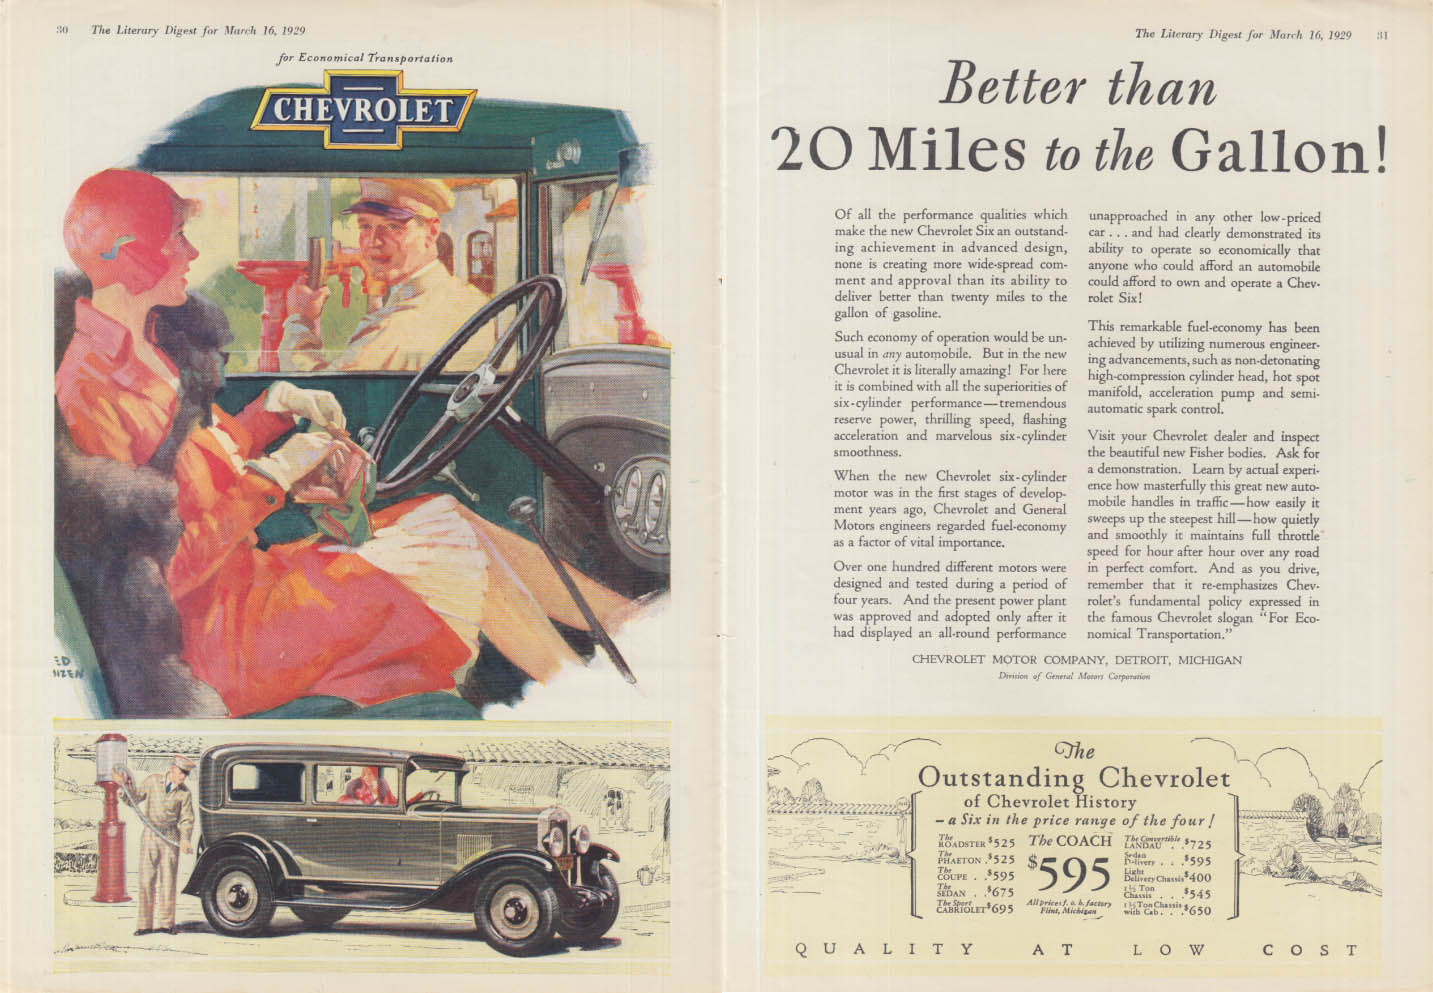 Better than 20 Miles to the Gallon! Chevrolet ad 1929 LD